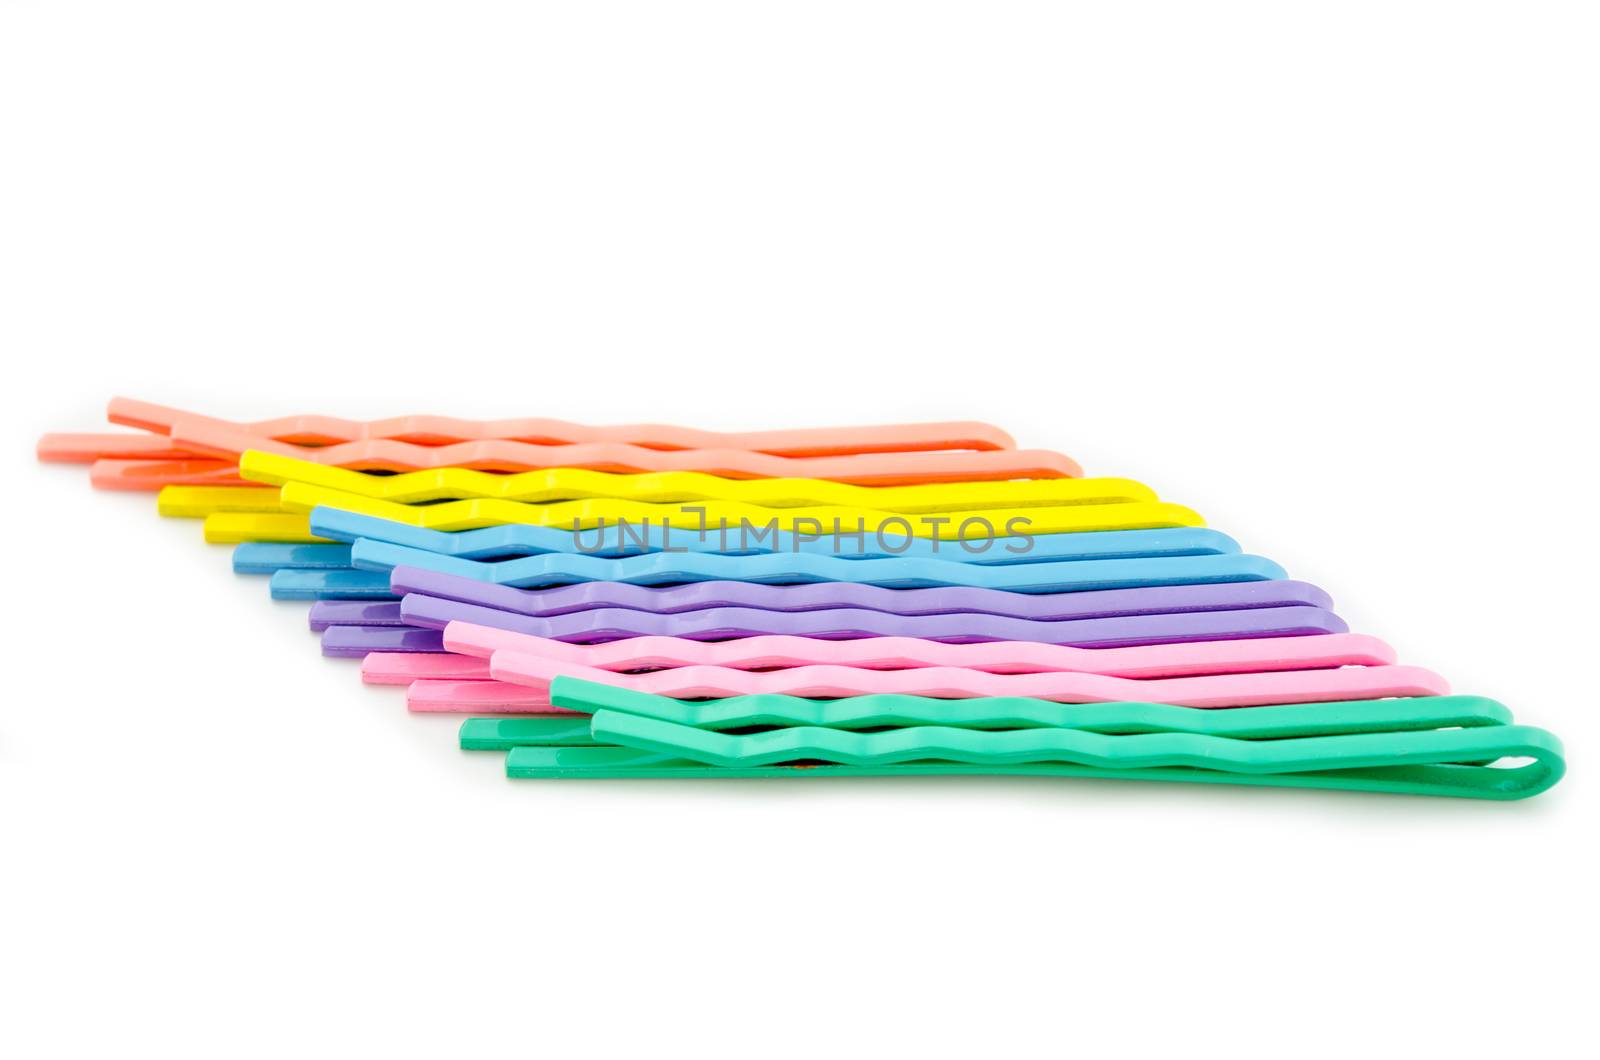 Colorful hair clips in a row isolated on white background.